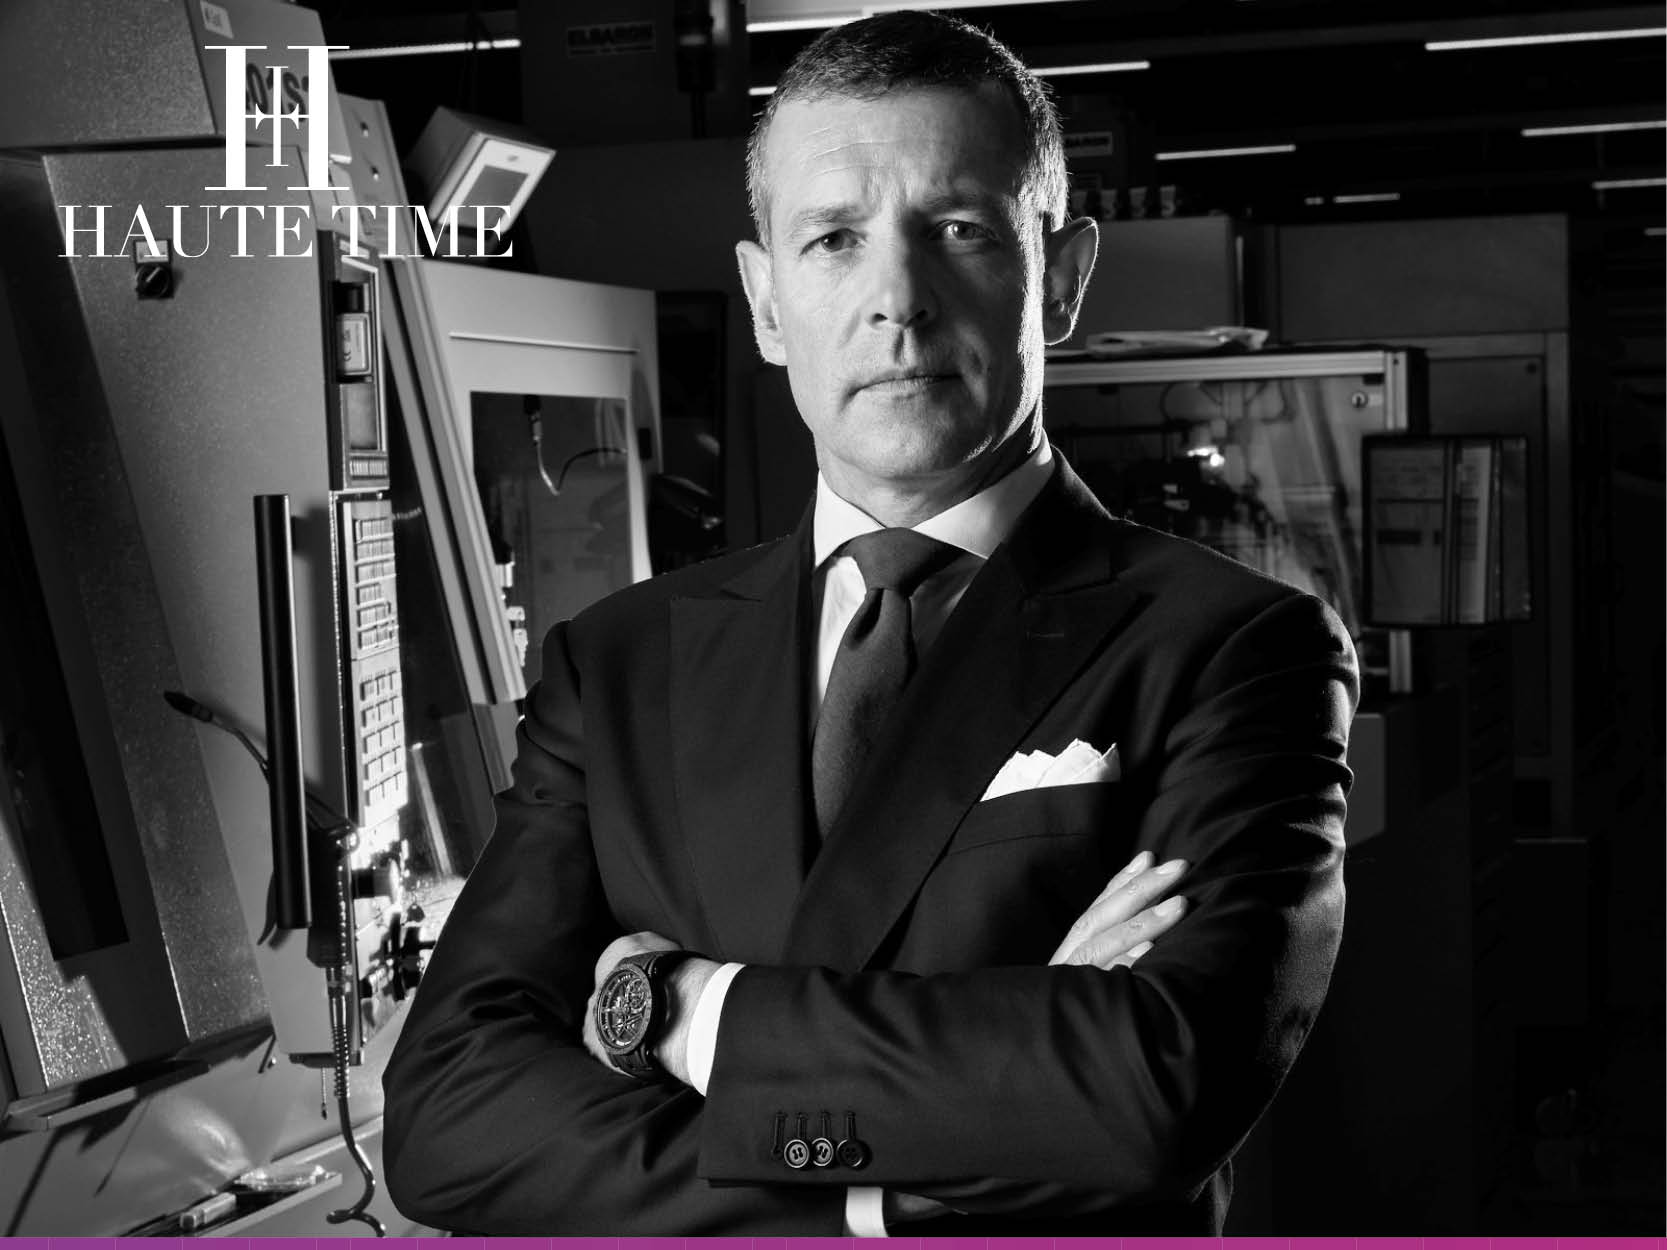 WATCH: Roger Dubuis CEO Nicola Andreatta Speaks On The Watch Industry Going Digital During Live Webinar By Haute Time